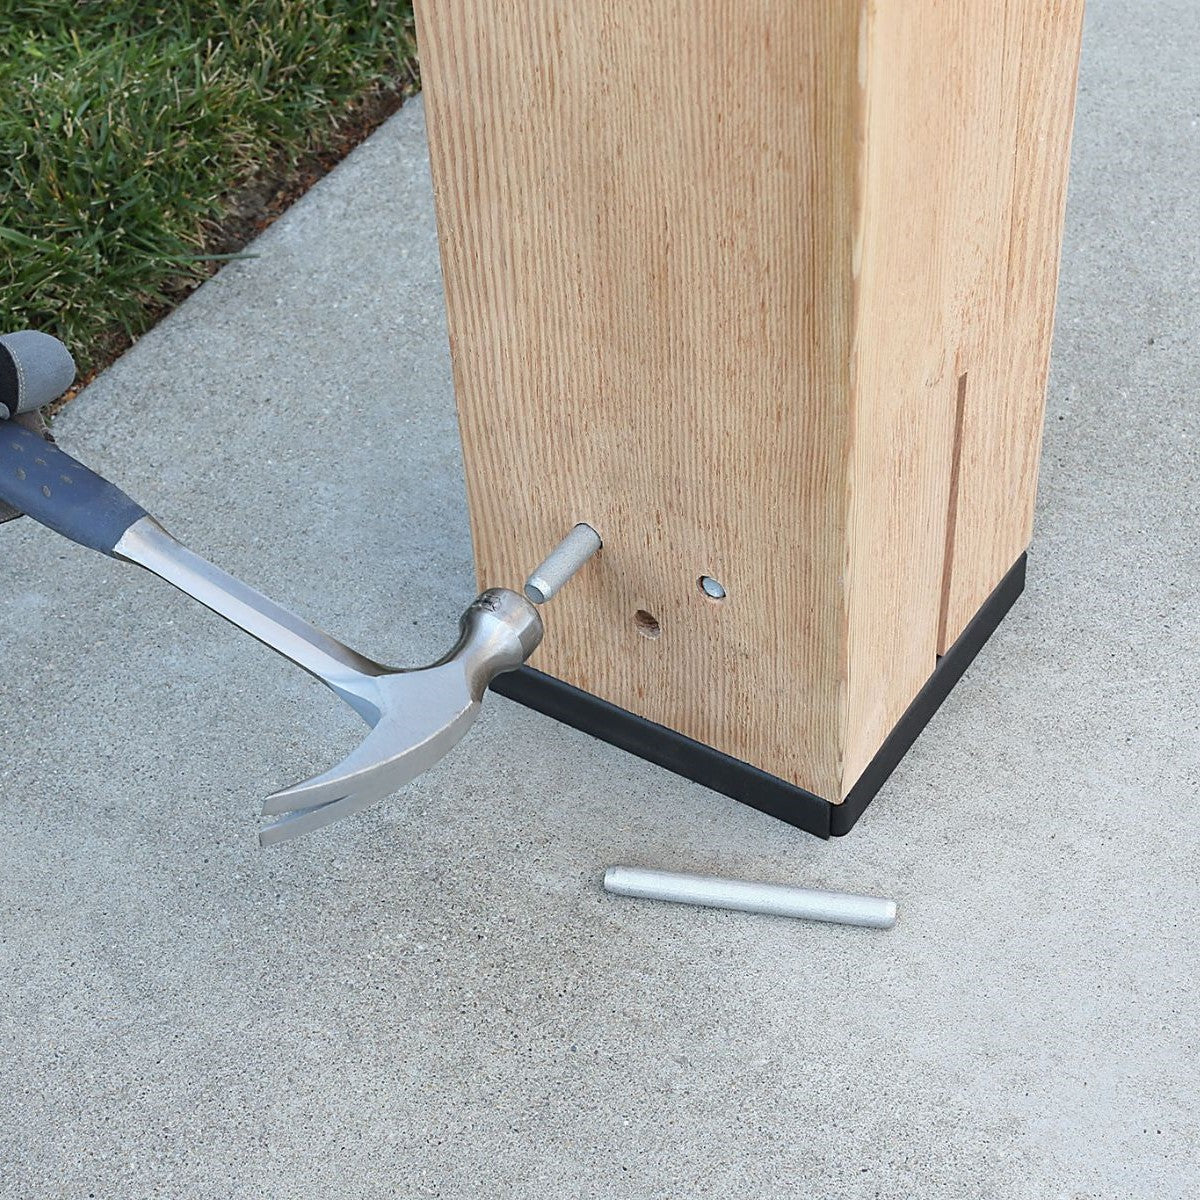 Simpson CPT88Z Concealed Post Tie For 8x8 Posts - Zmax Finish